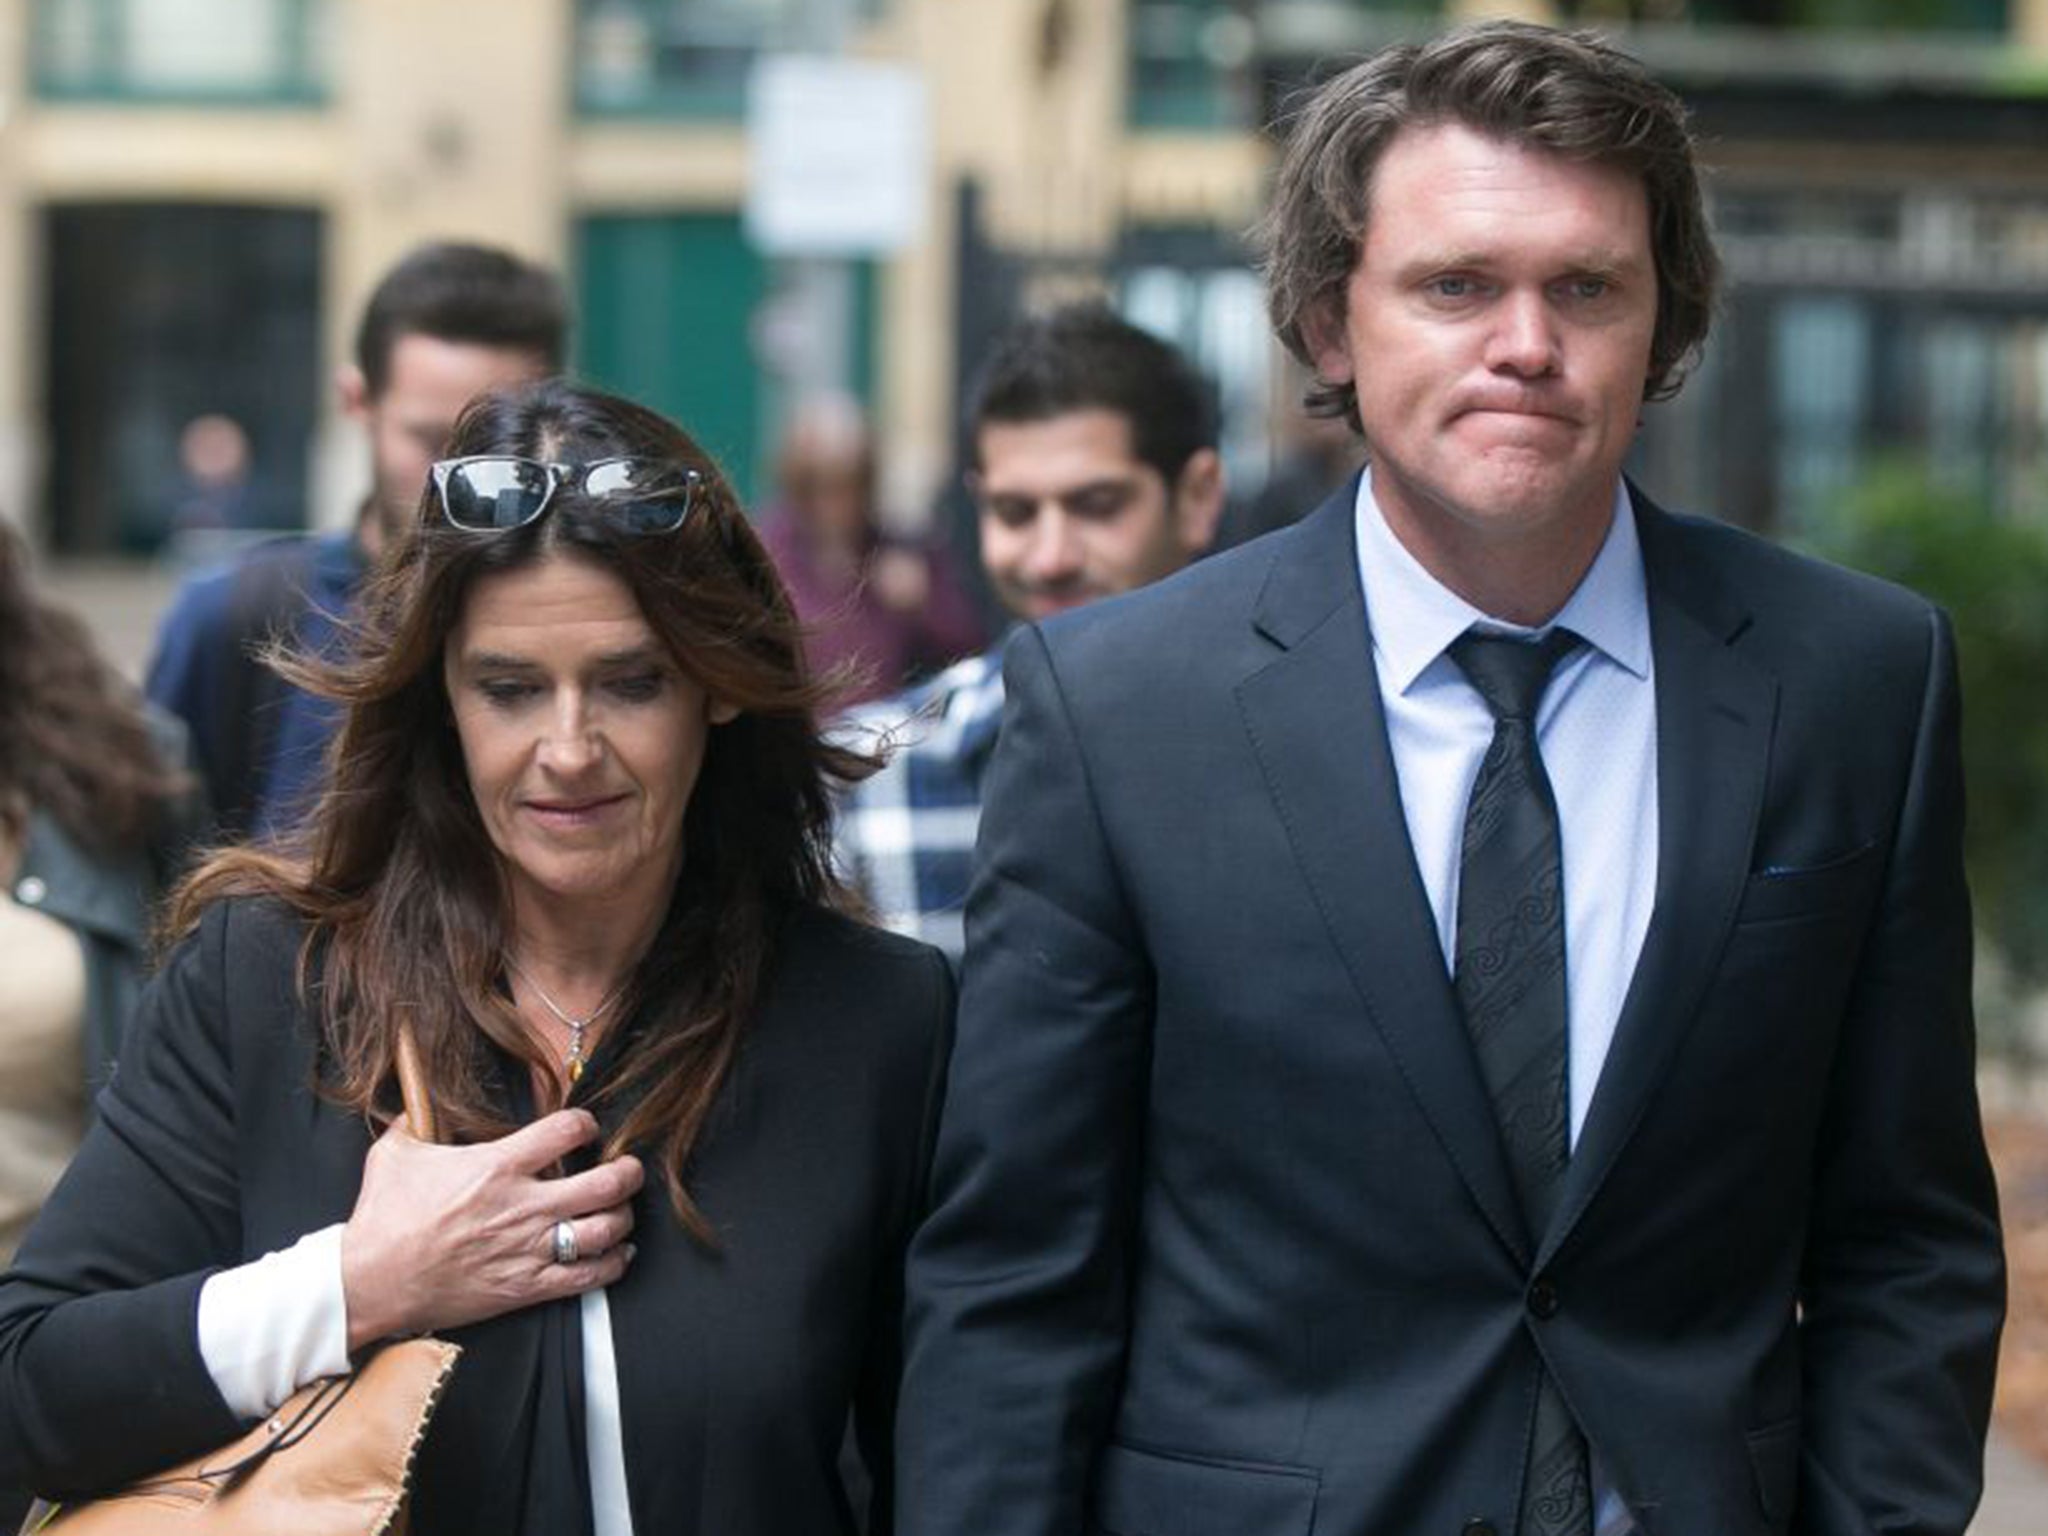 Lou Vincent arriving at Southwark Crown Court on Monday with his partner, Susie Markham